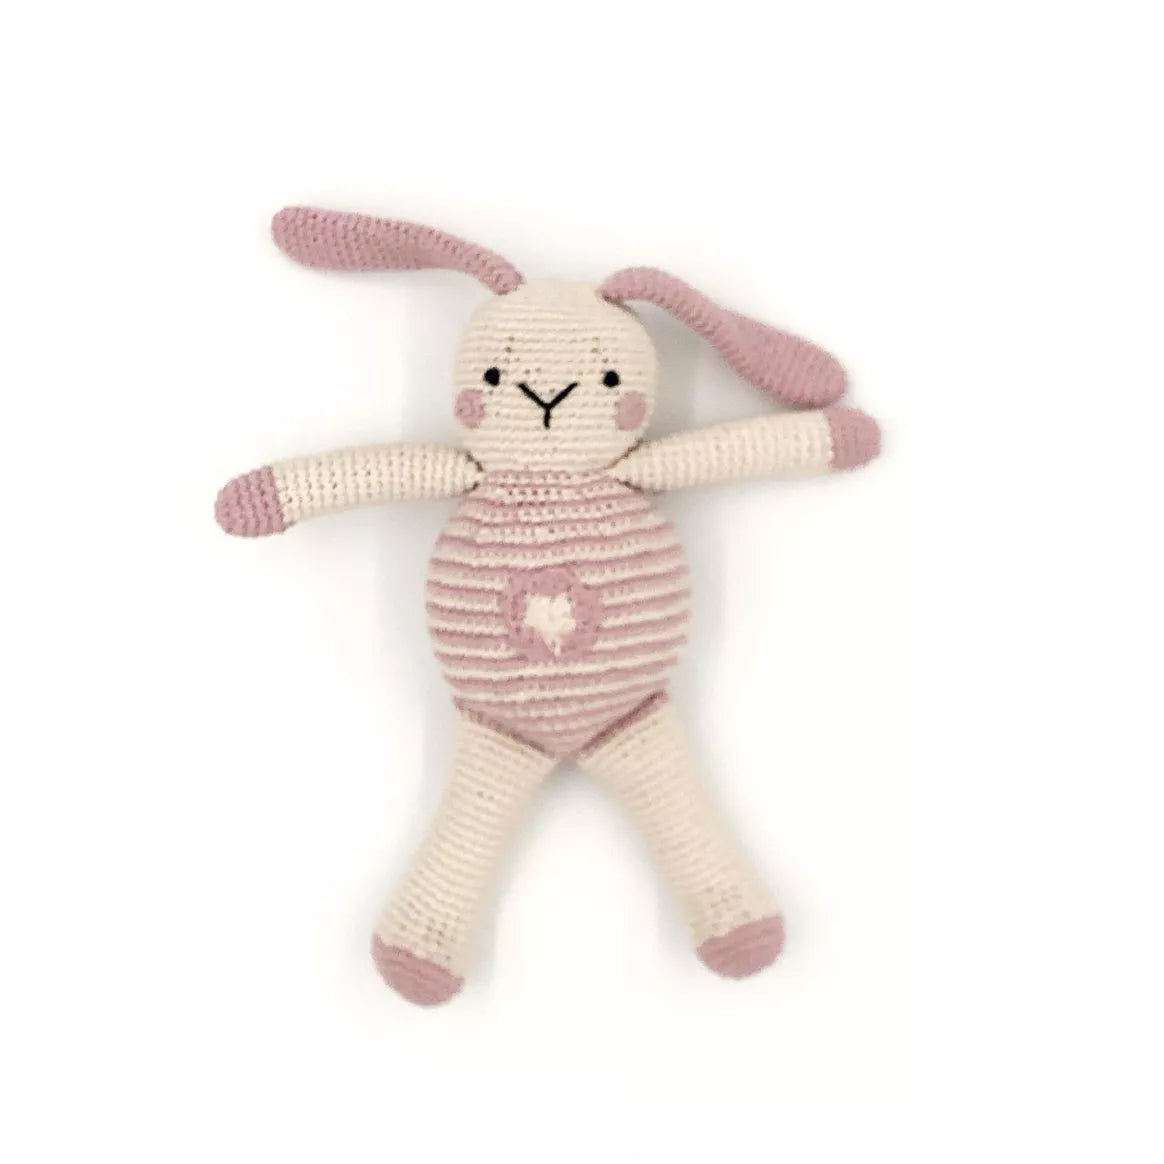 Pebble Fair Trade Hand Knitted Bunny